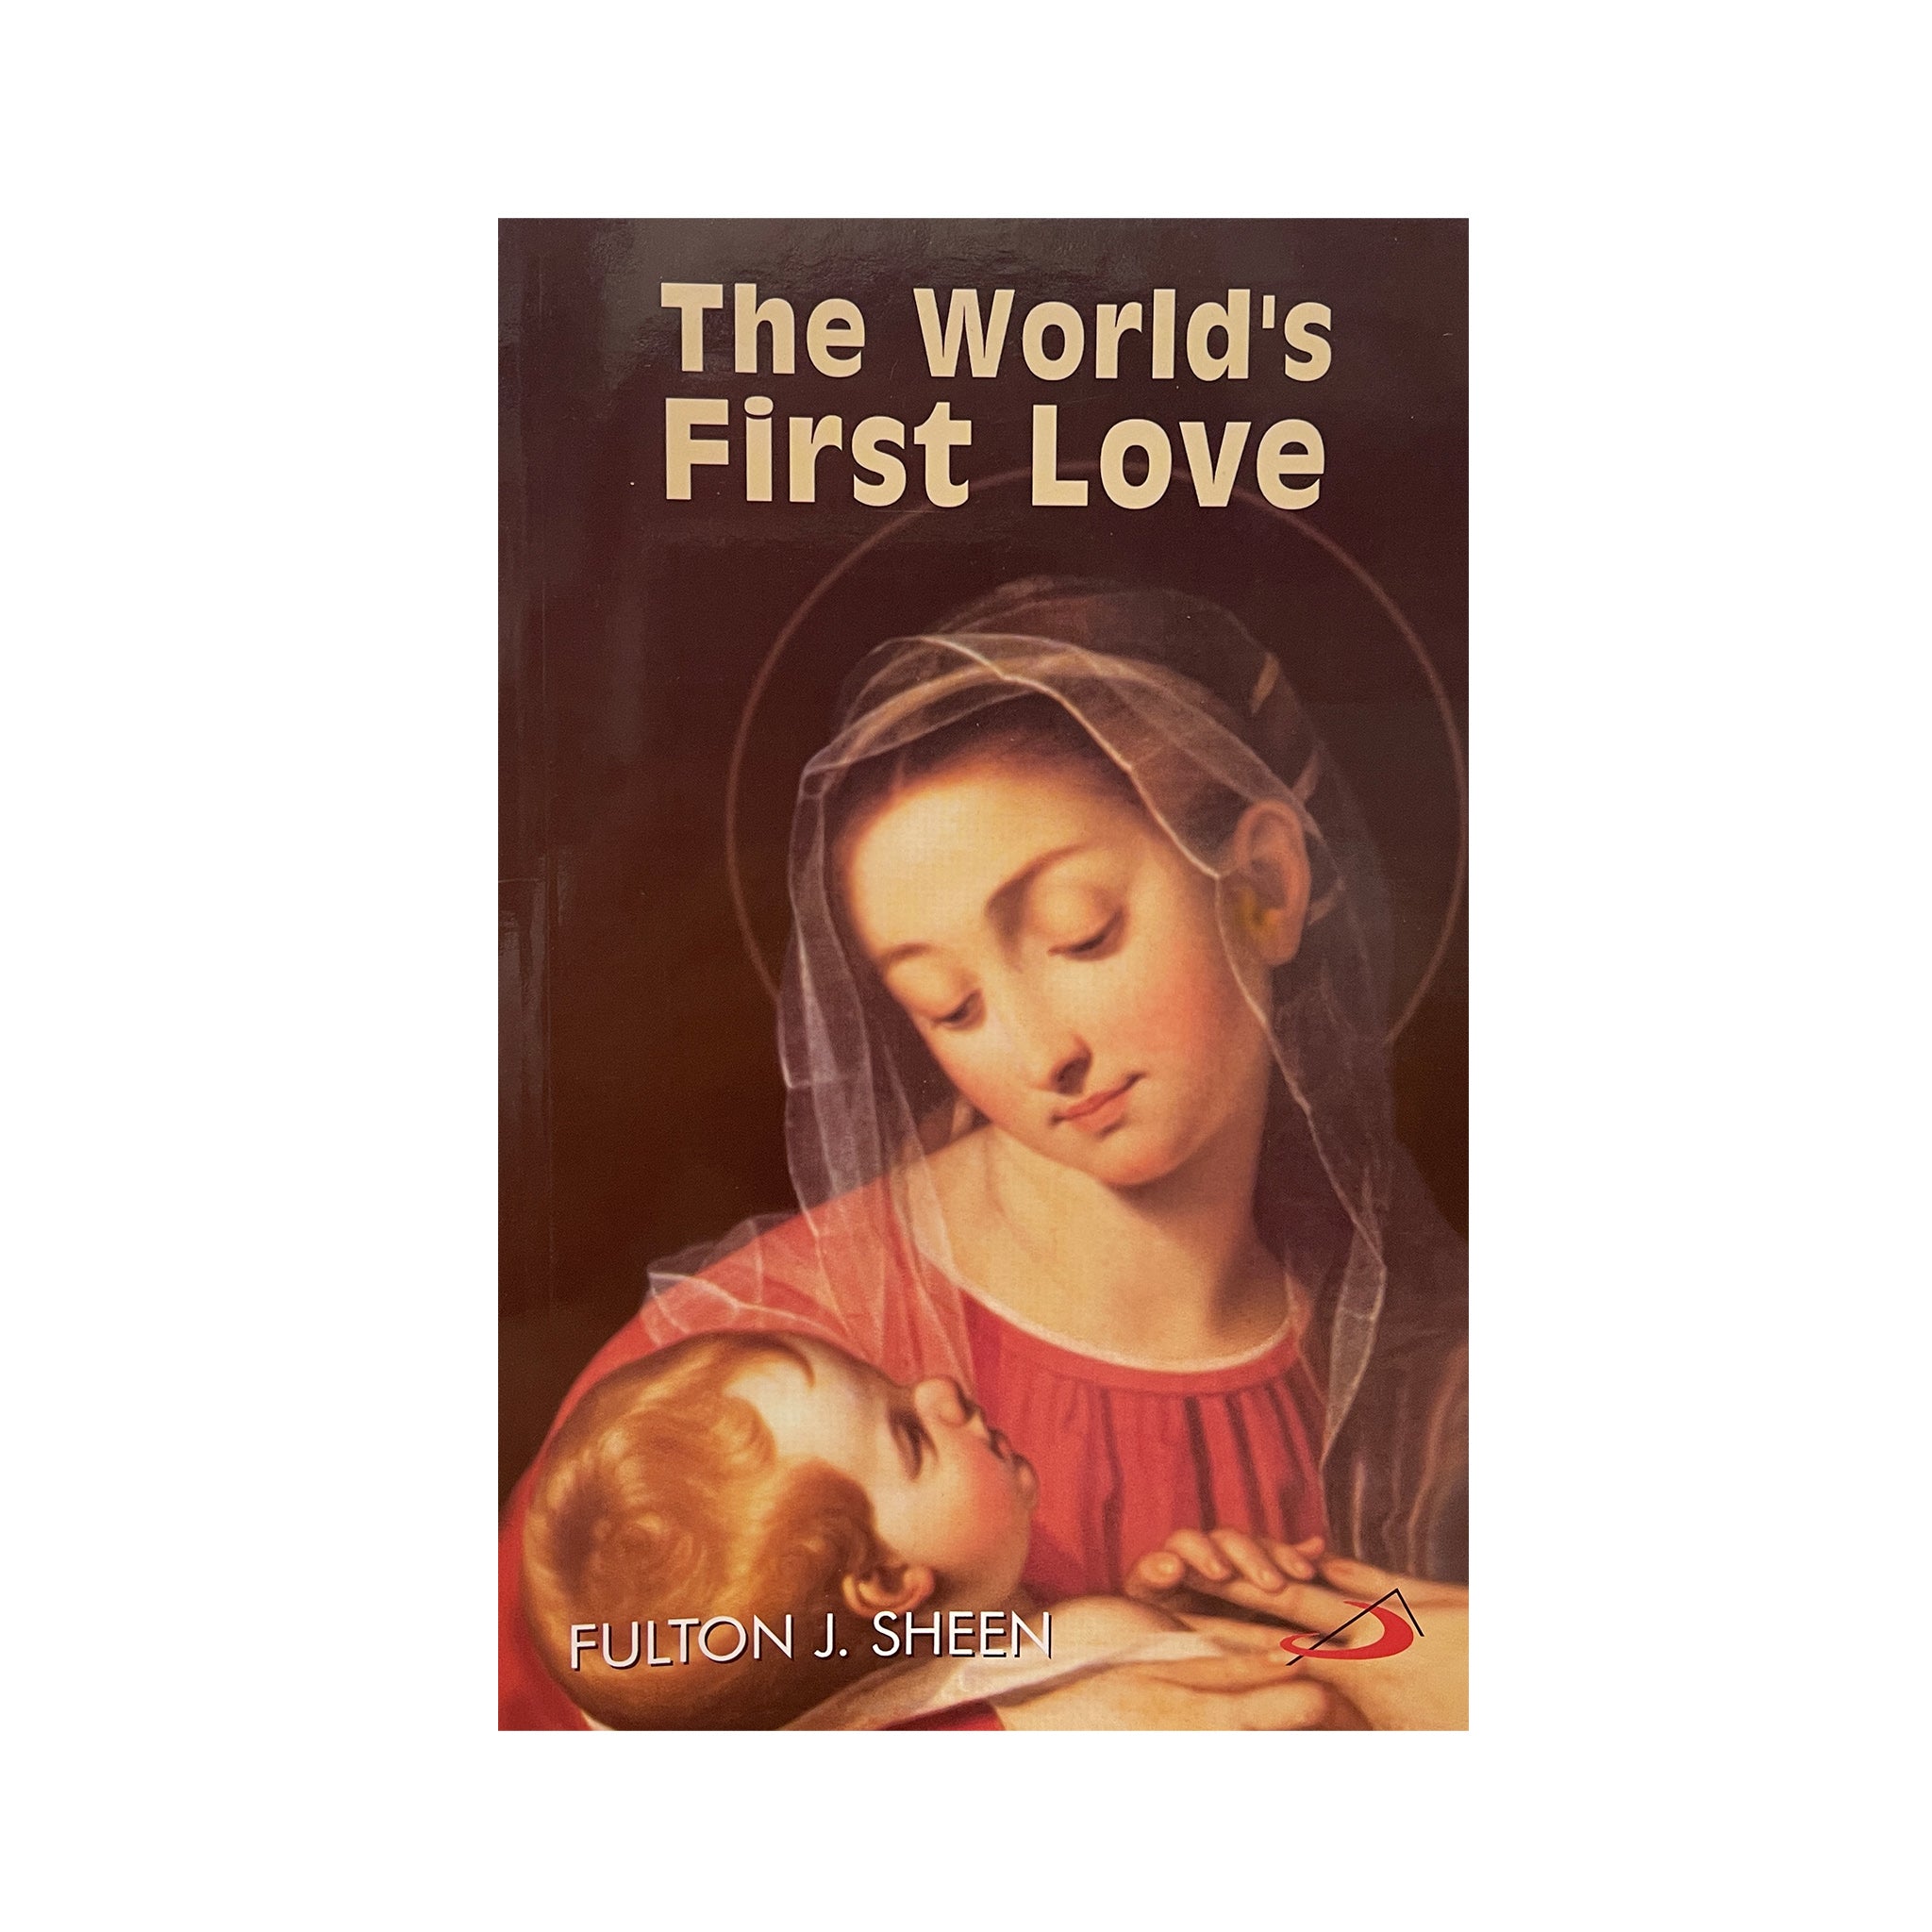 THE WORLD'S FIRST LOVE